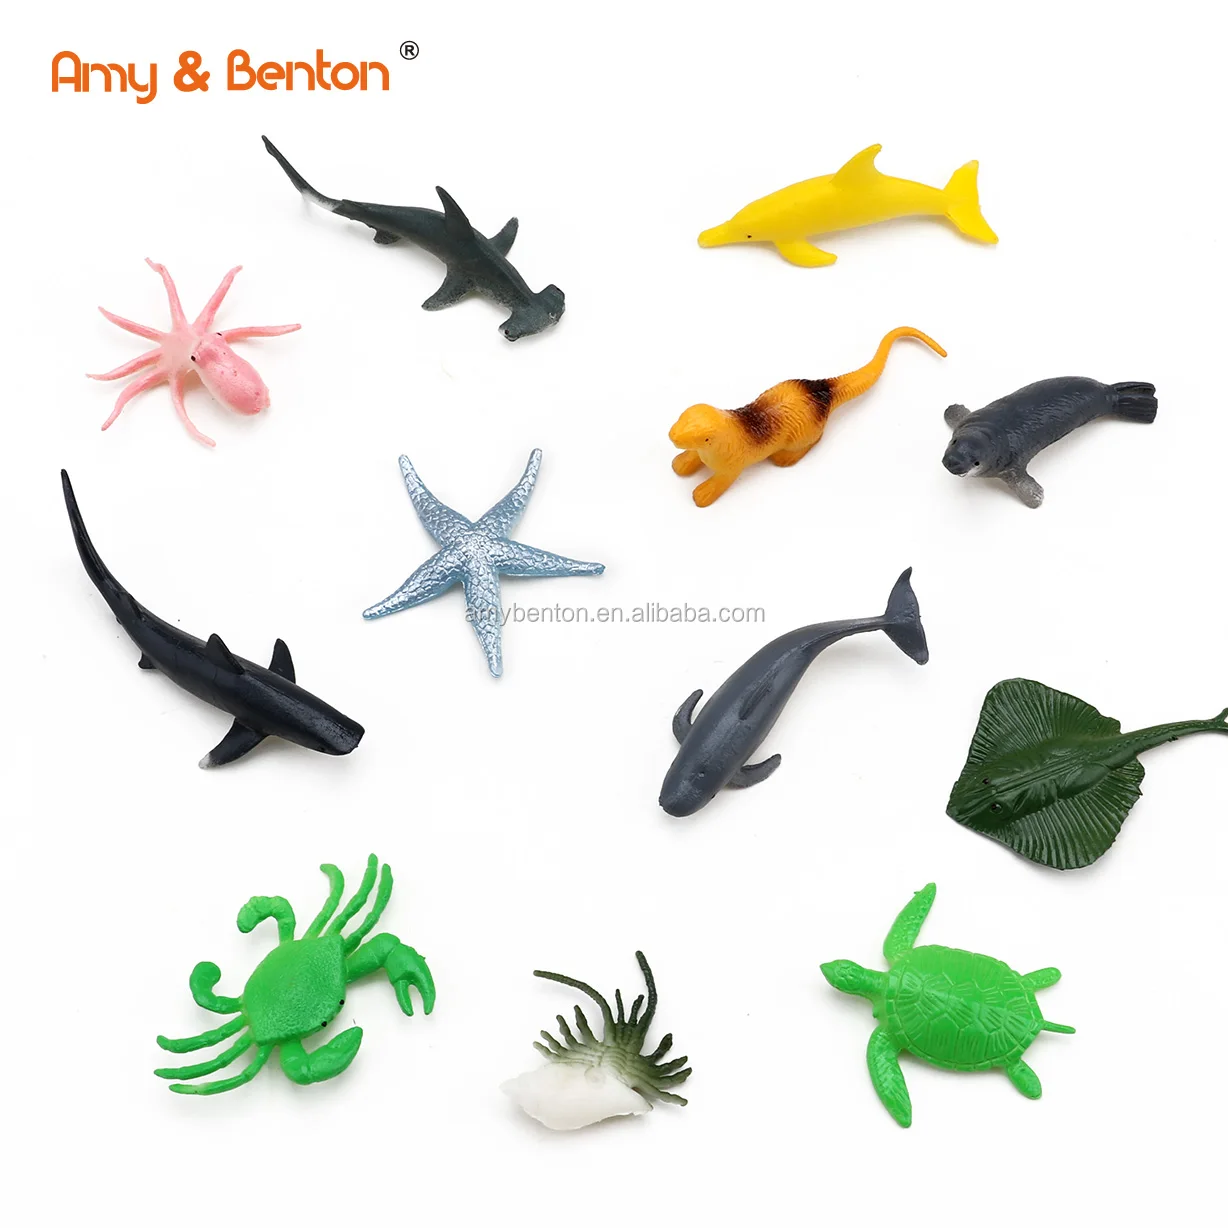 12Plastic Ocean Animals Figure Sea Creatures Models Toy Dolphins Turtle Whale WF 